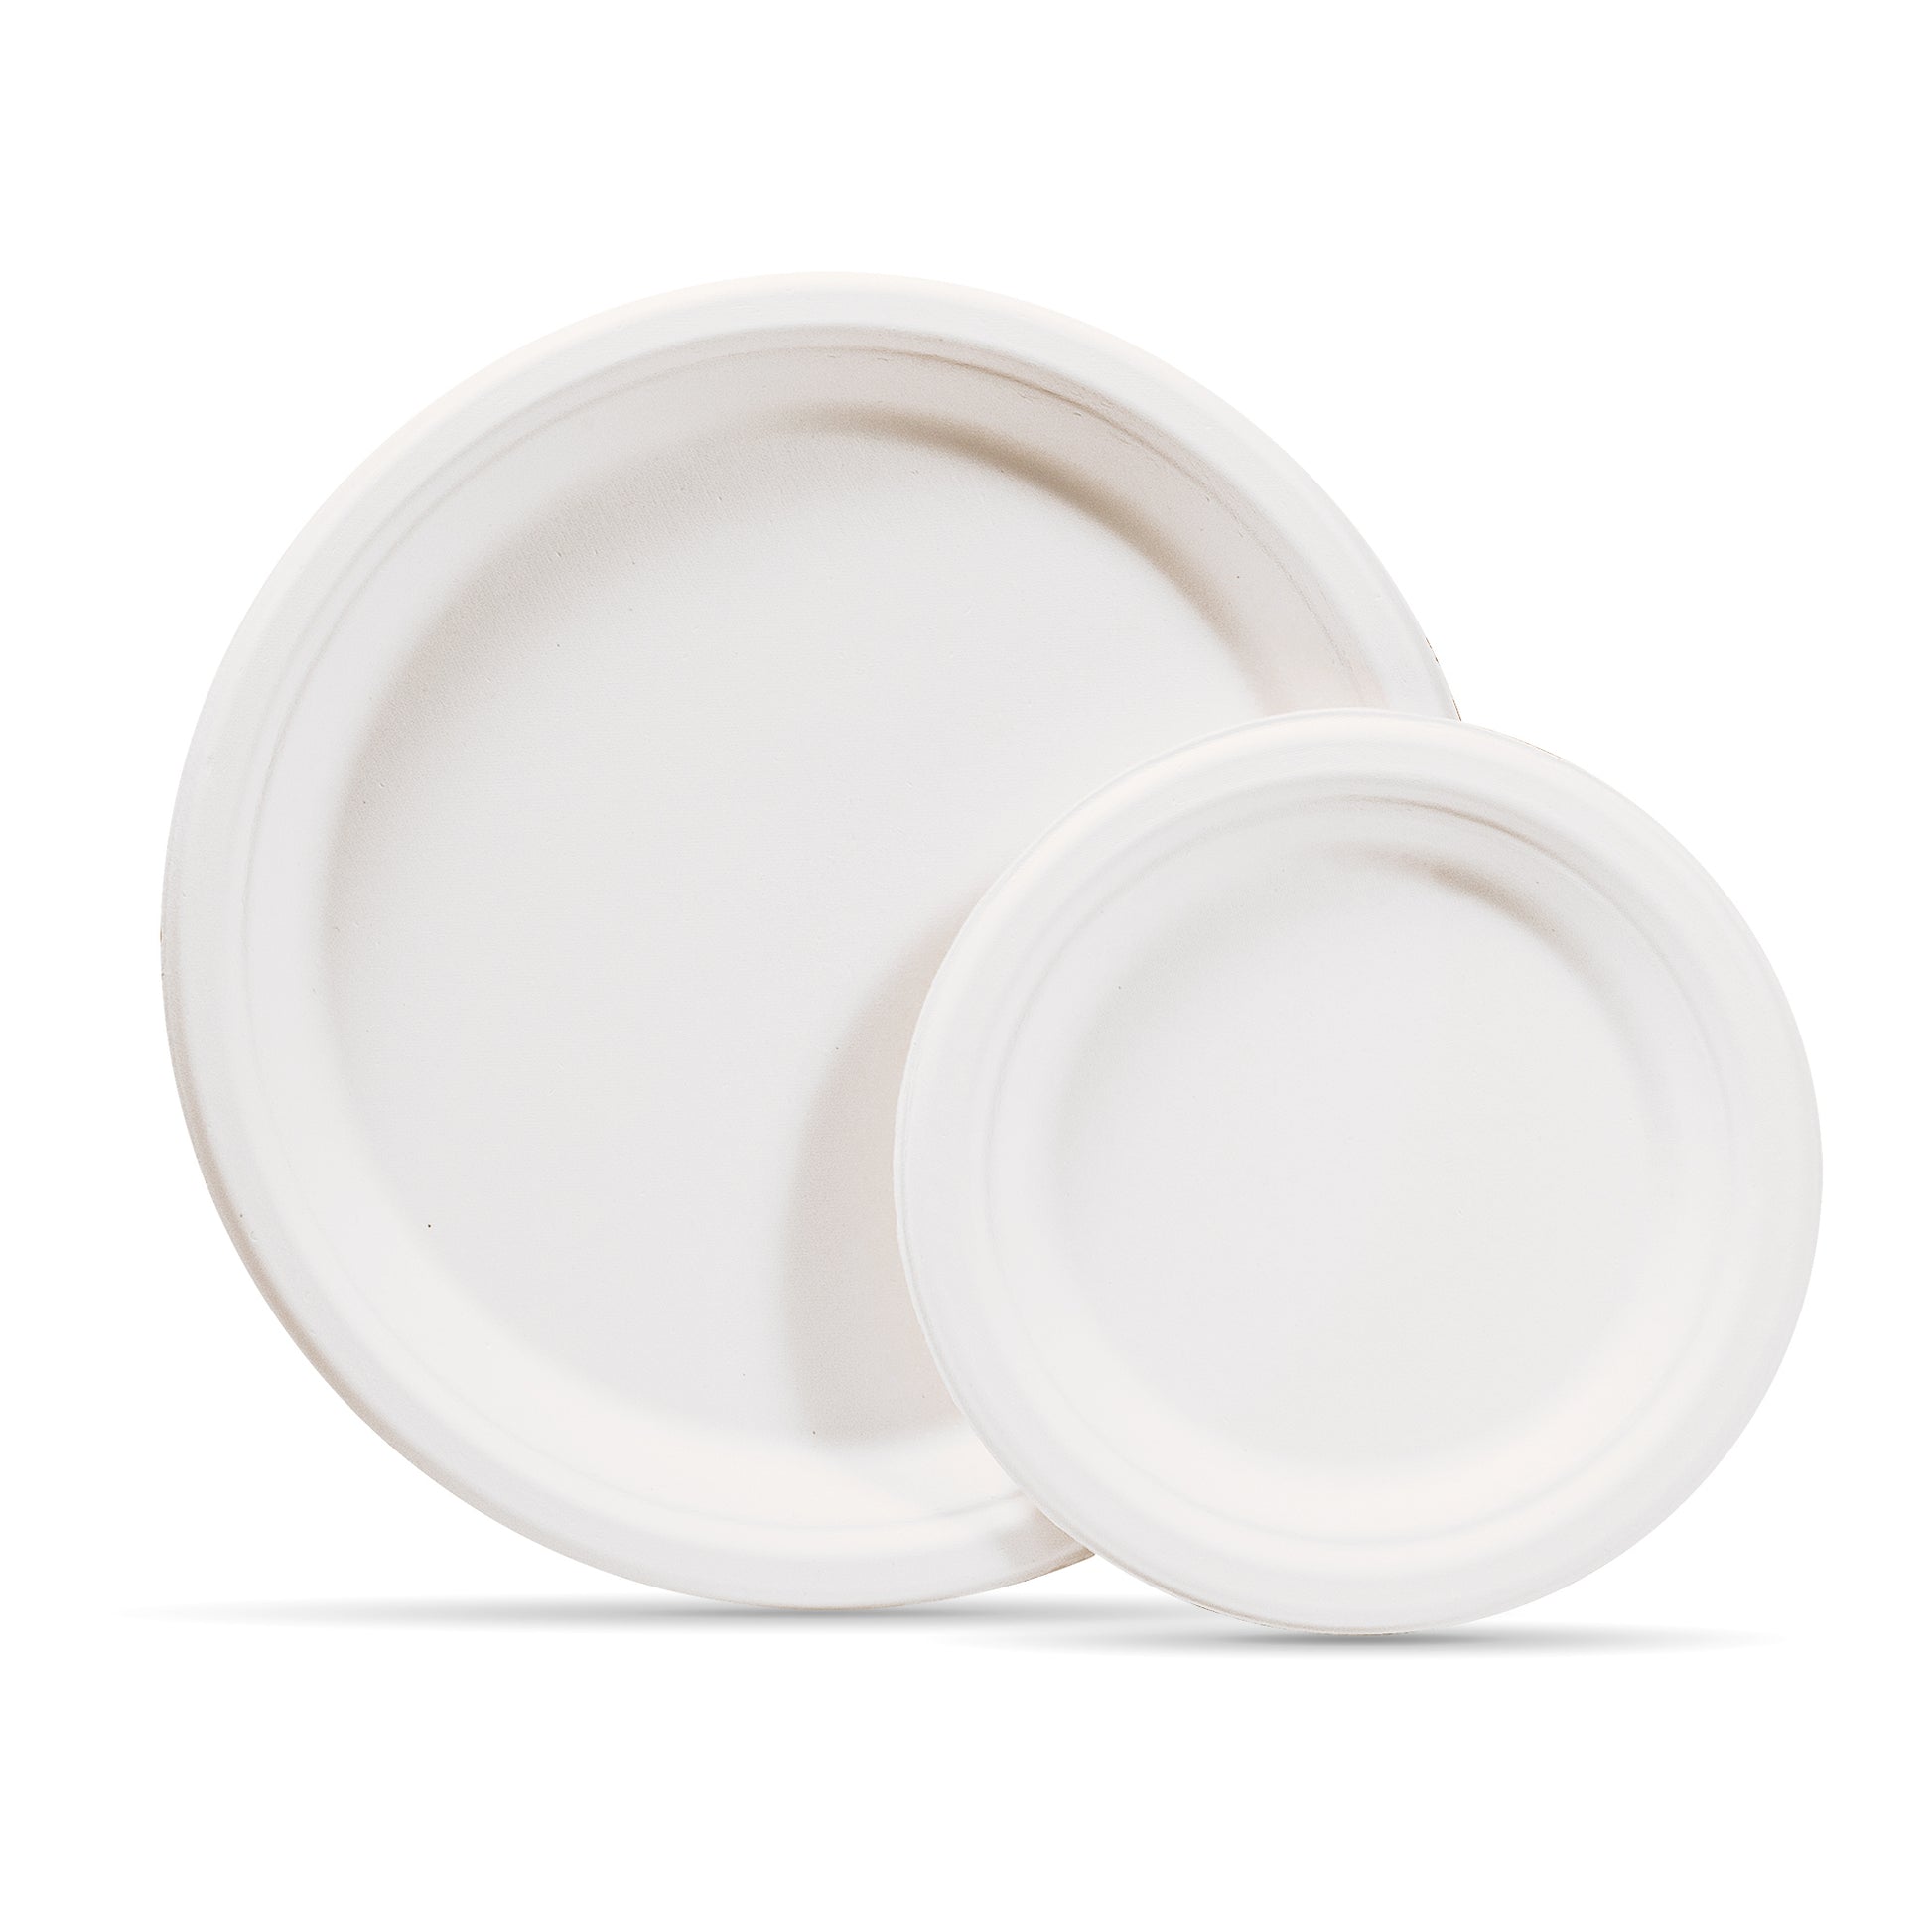 Stock Your Home 100% Compostable Paper Plates White 9 Inch (125-Count)  Heavy Duty Dinner Plate Disposable Biodegradable Eco-Friendly Sturdy, Made  of